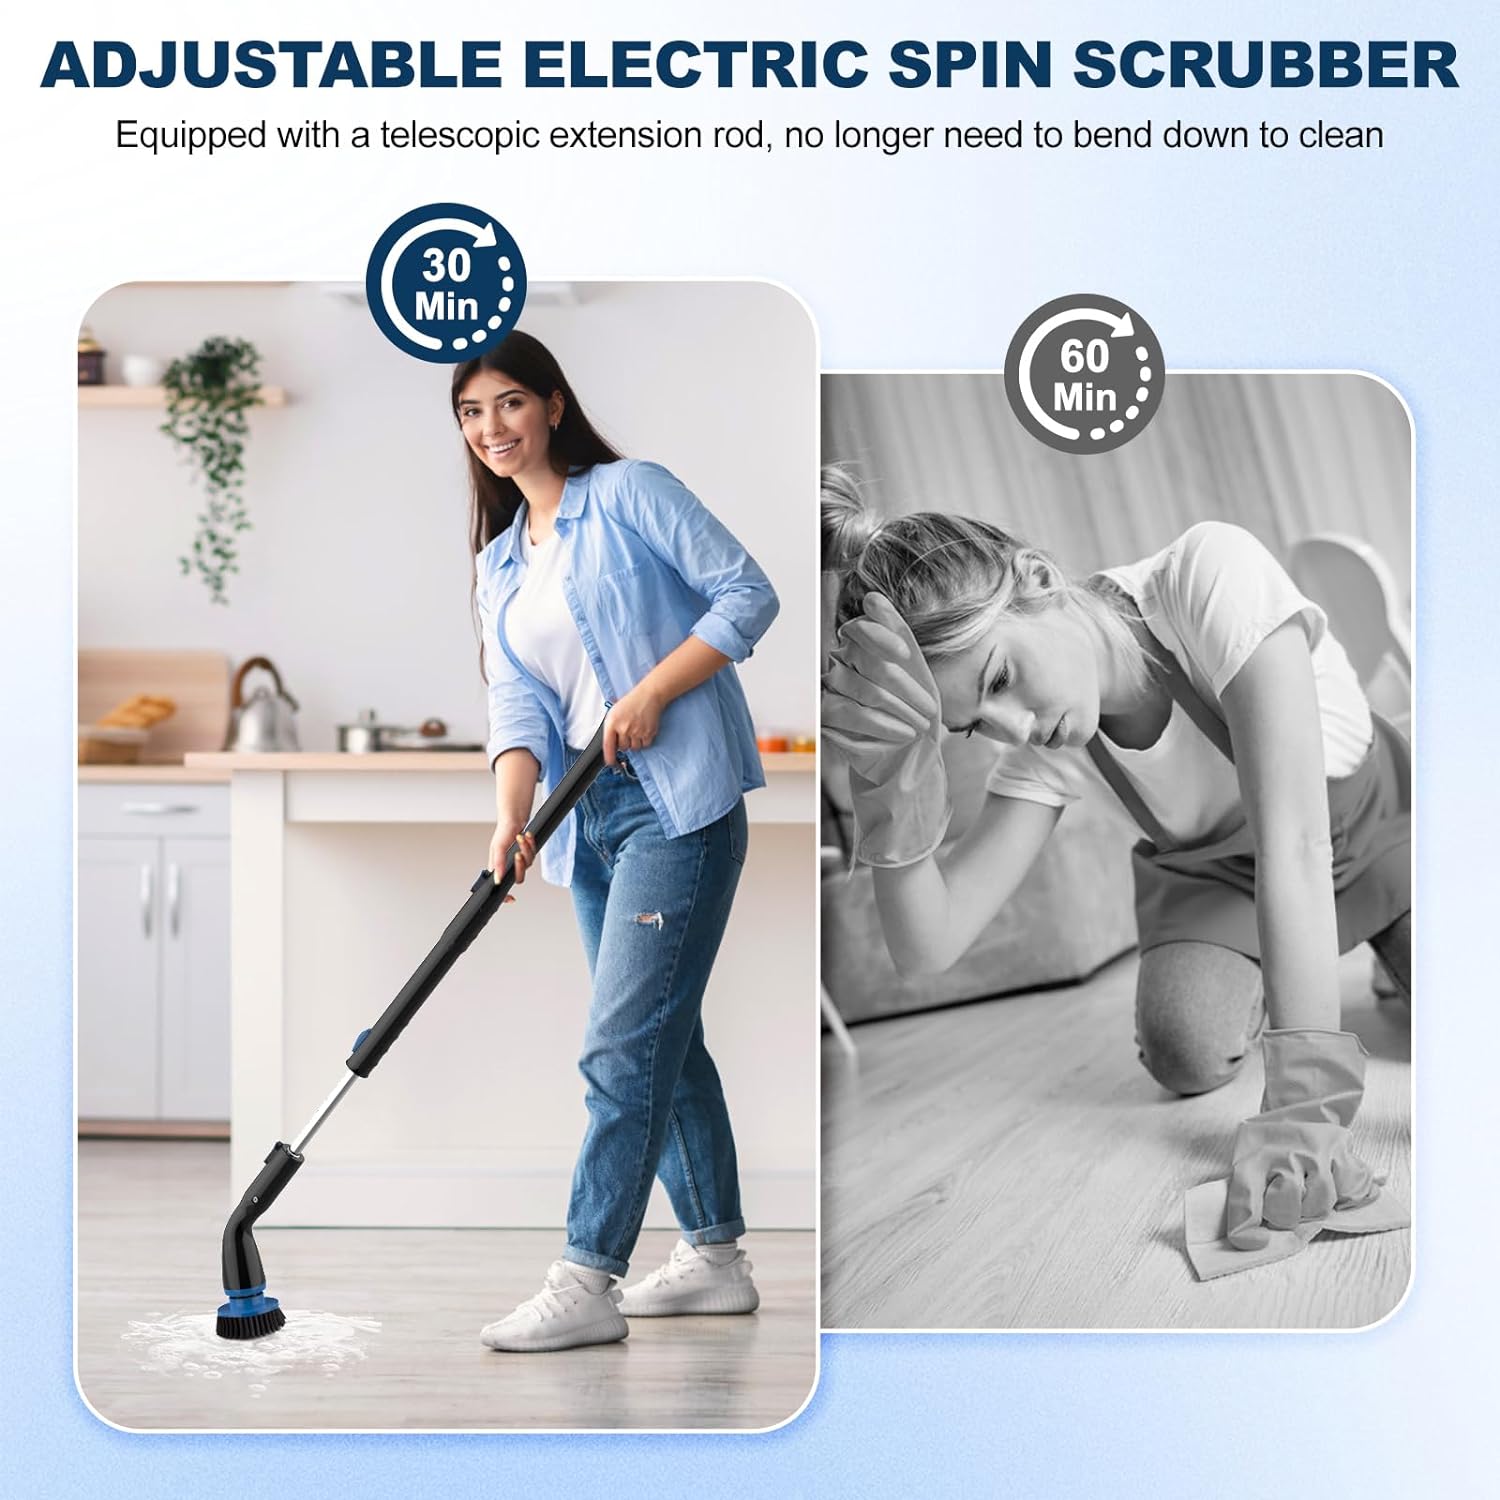 Black Electric Spin Scrubber, Cordless Cleaning Brush With 4 Replaceable Brush Heads And Adjustable Extension Handle Power Shower Scrubber For Bathroom, Kitchen, Tub, Tile, Floor